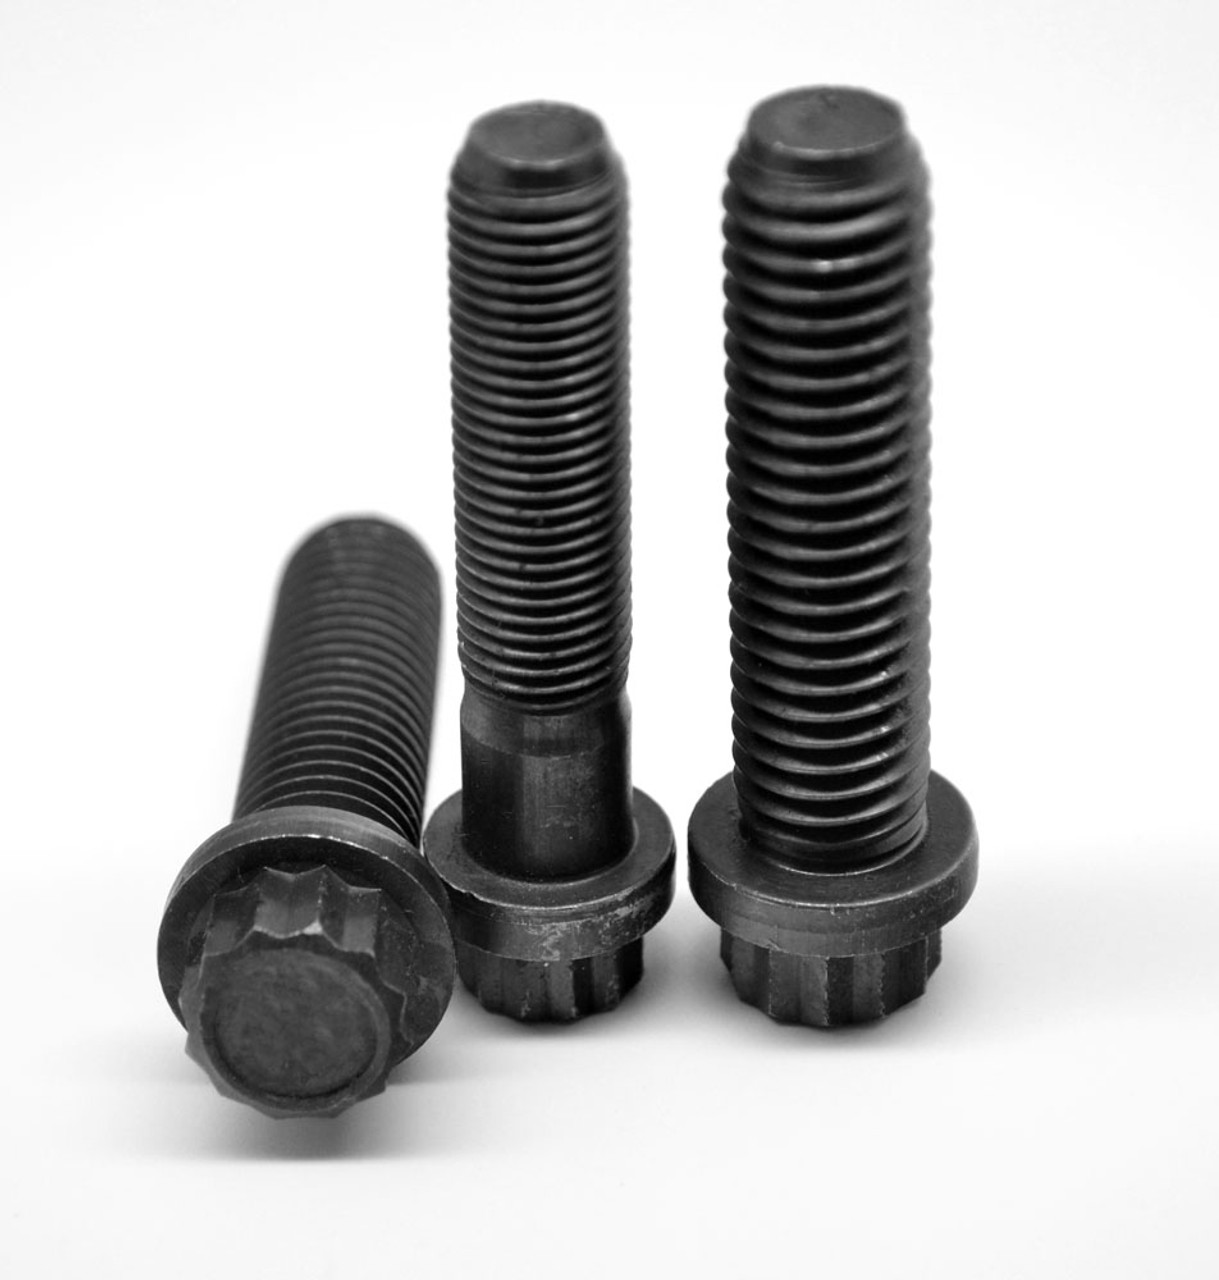 3/4-10 x 10 Coarse Thread 12-Point Flange Screw Alloy Steel Thermal Black Oxide